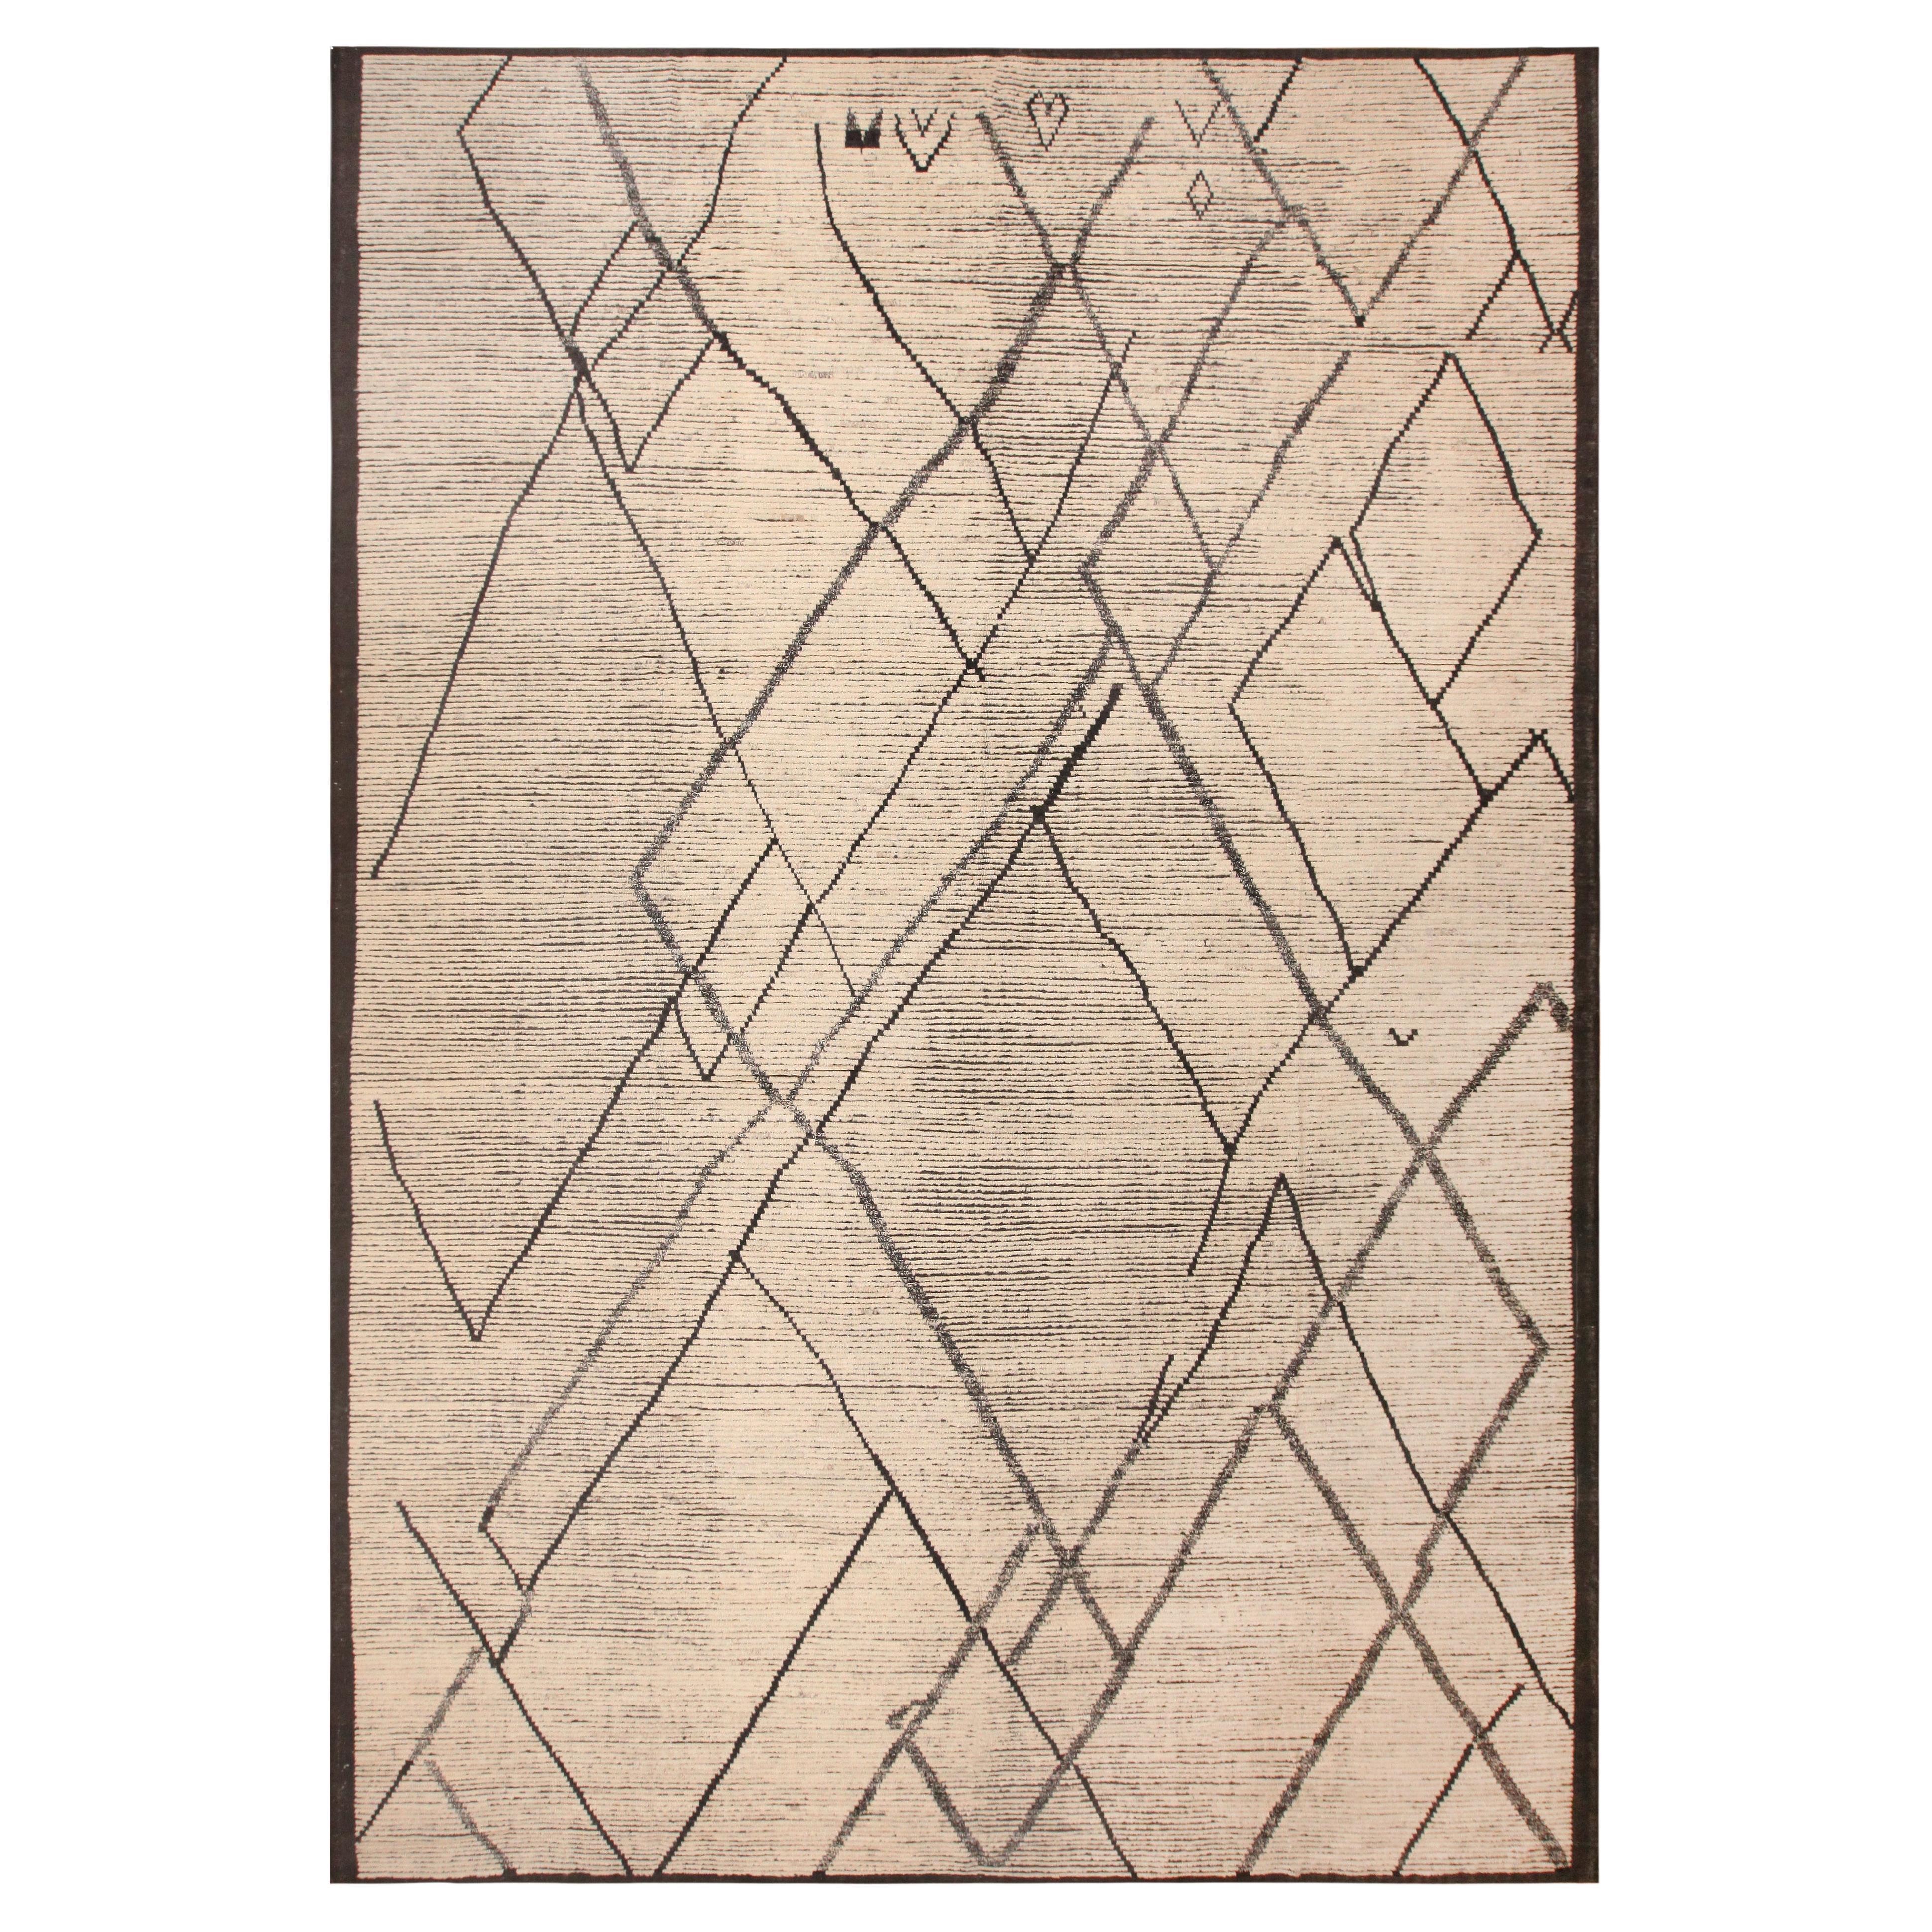 Nazmiyal Collection Large Trendy Tribal Modern Decorative Area Rug 13'2" x 19'1" For Sale